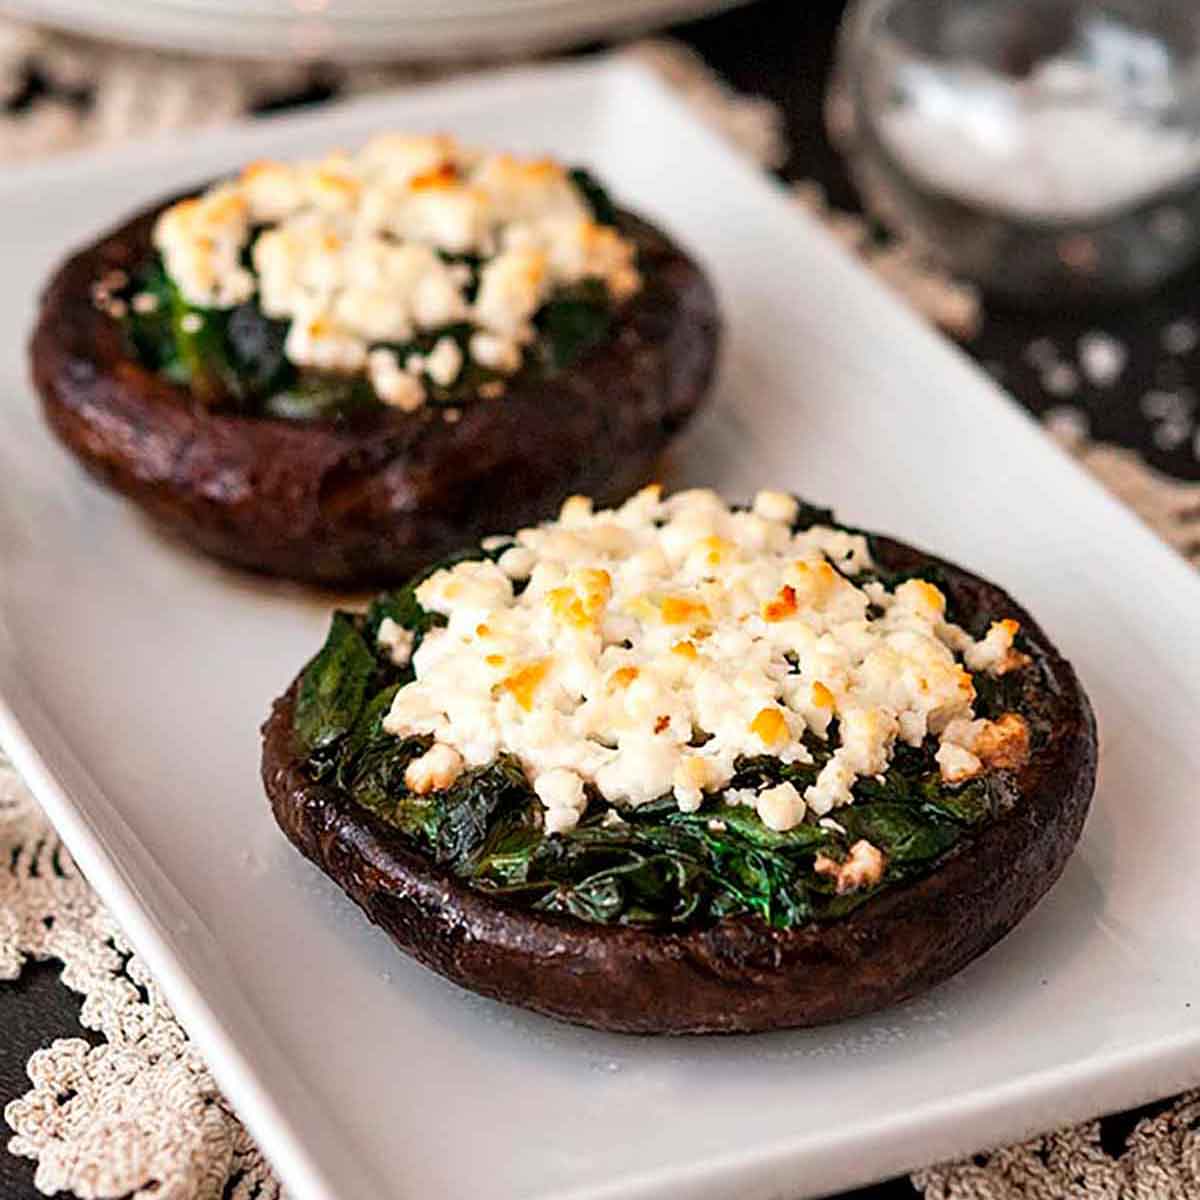 2 spinach and feta-stuffed mushroom caps on a plate on a table, lined with lace with 2 stacked plates in the background.